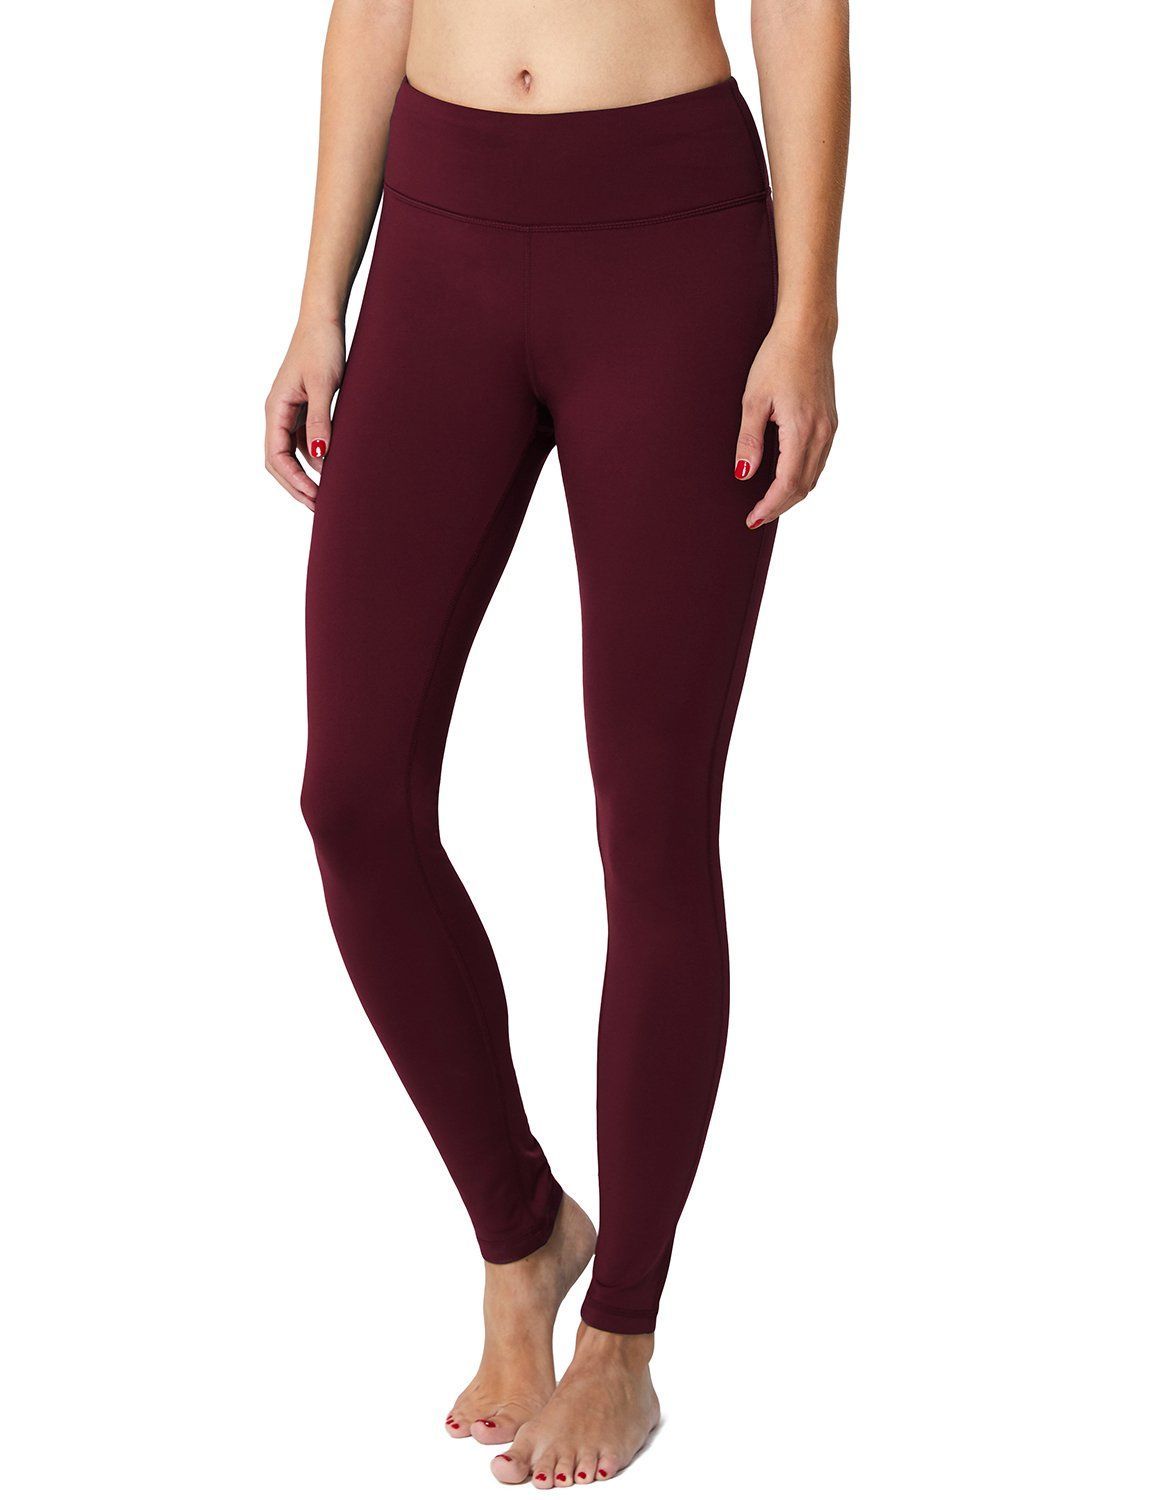 Buy Pixie Woolen Leggings for Women, Winter Bottom Wear Combo Pack of 3  (Black, Maroon and Light Grey) Best fit 28 Inches to 36 Inches at Amazon.in